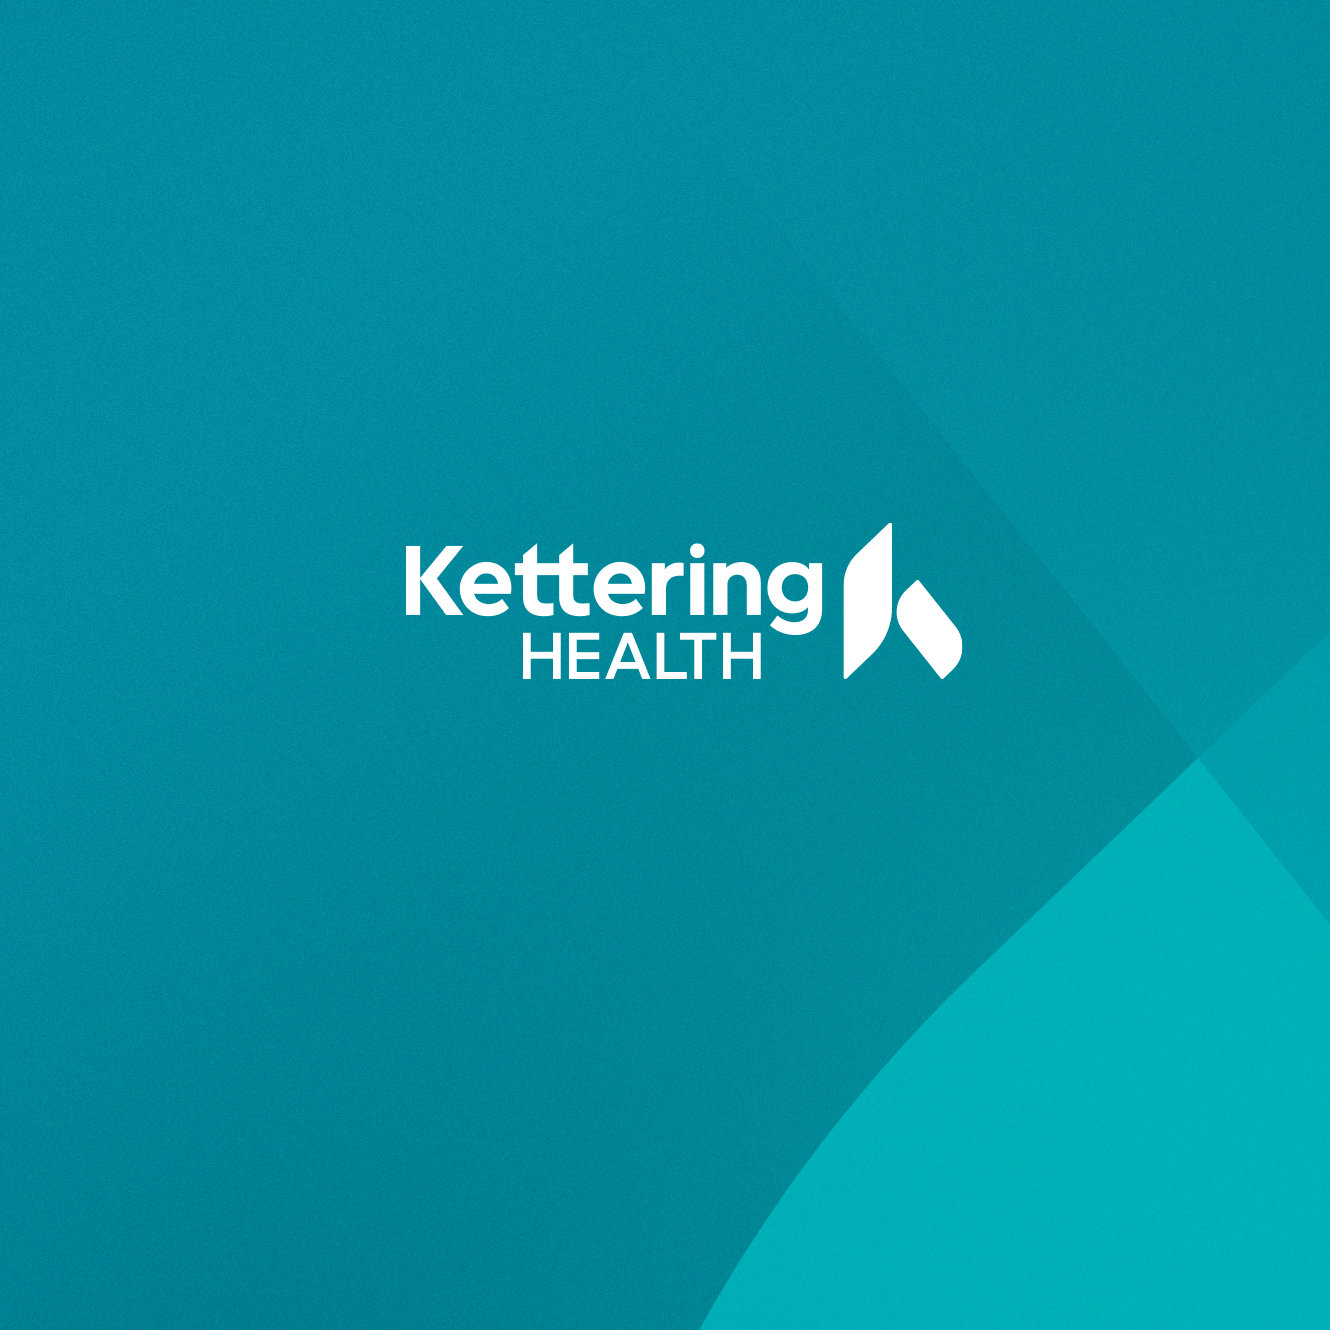 On-demand Care Kettering Health